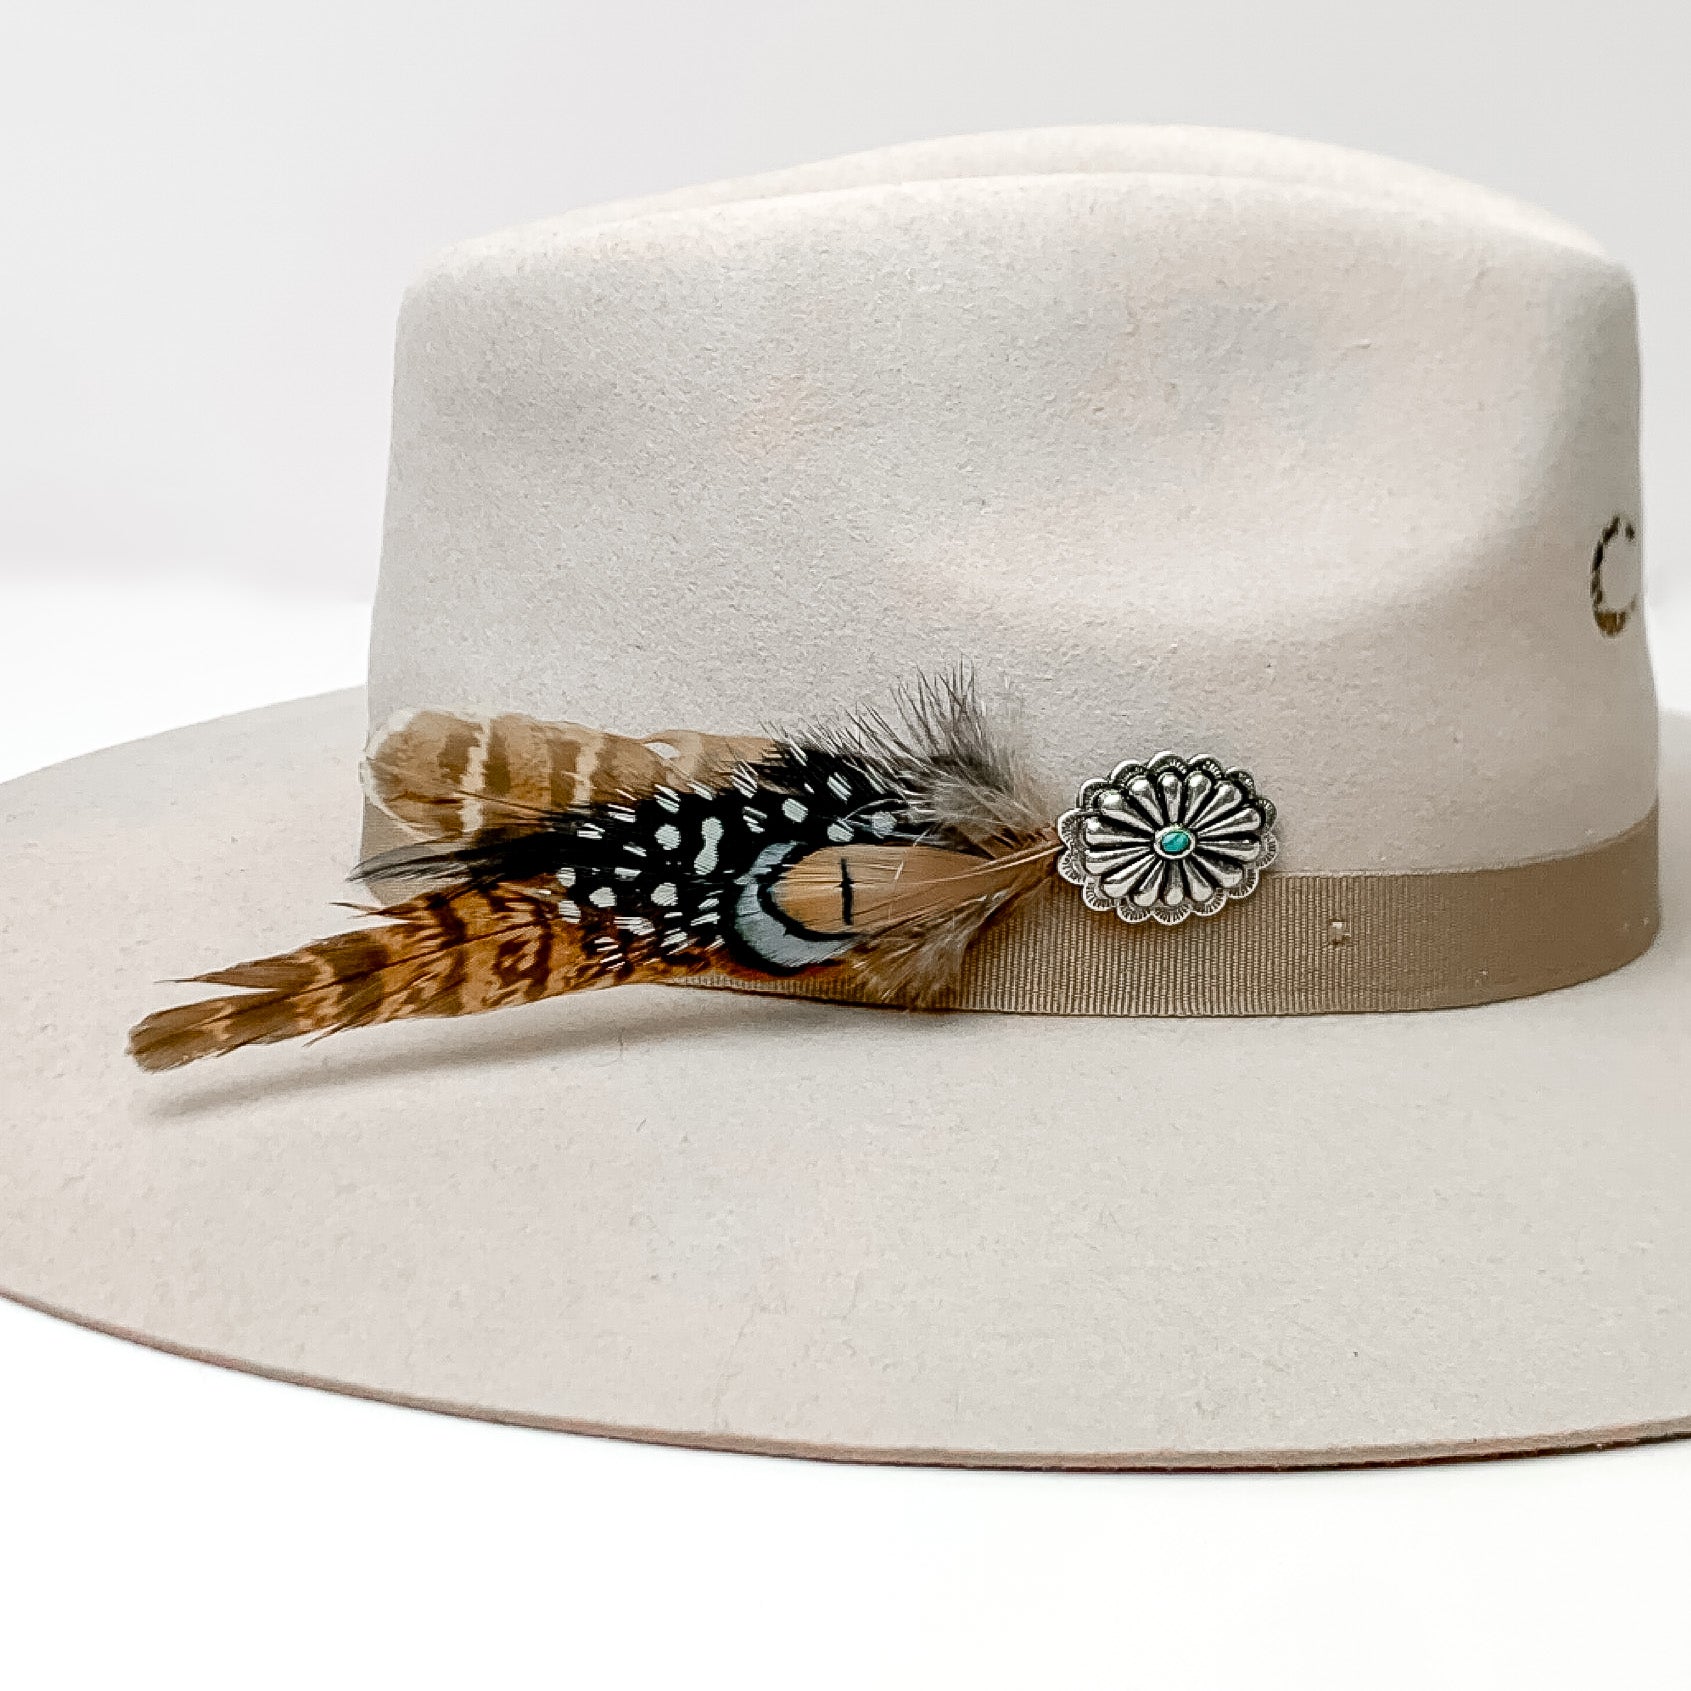 Oval Concho With Mixed Brown and Black Feathers Hat Pin With Turquoise Stone. Pictured on a white background with the pin on the side of a light grey/ brown hat.